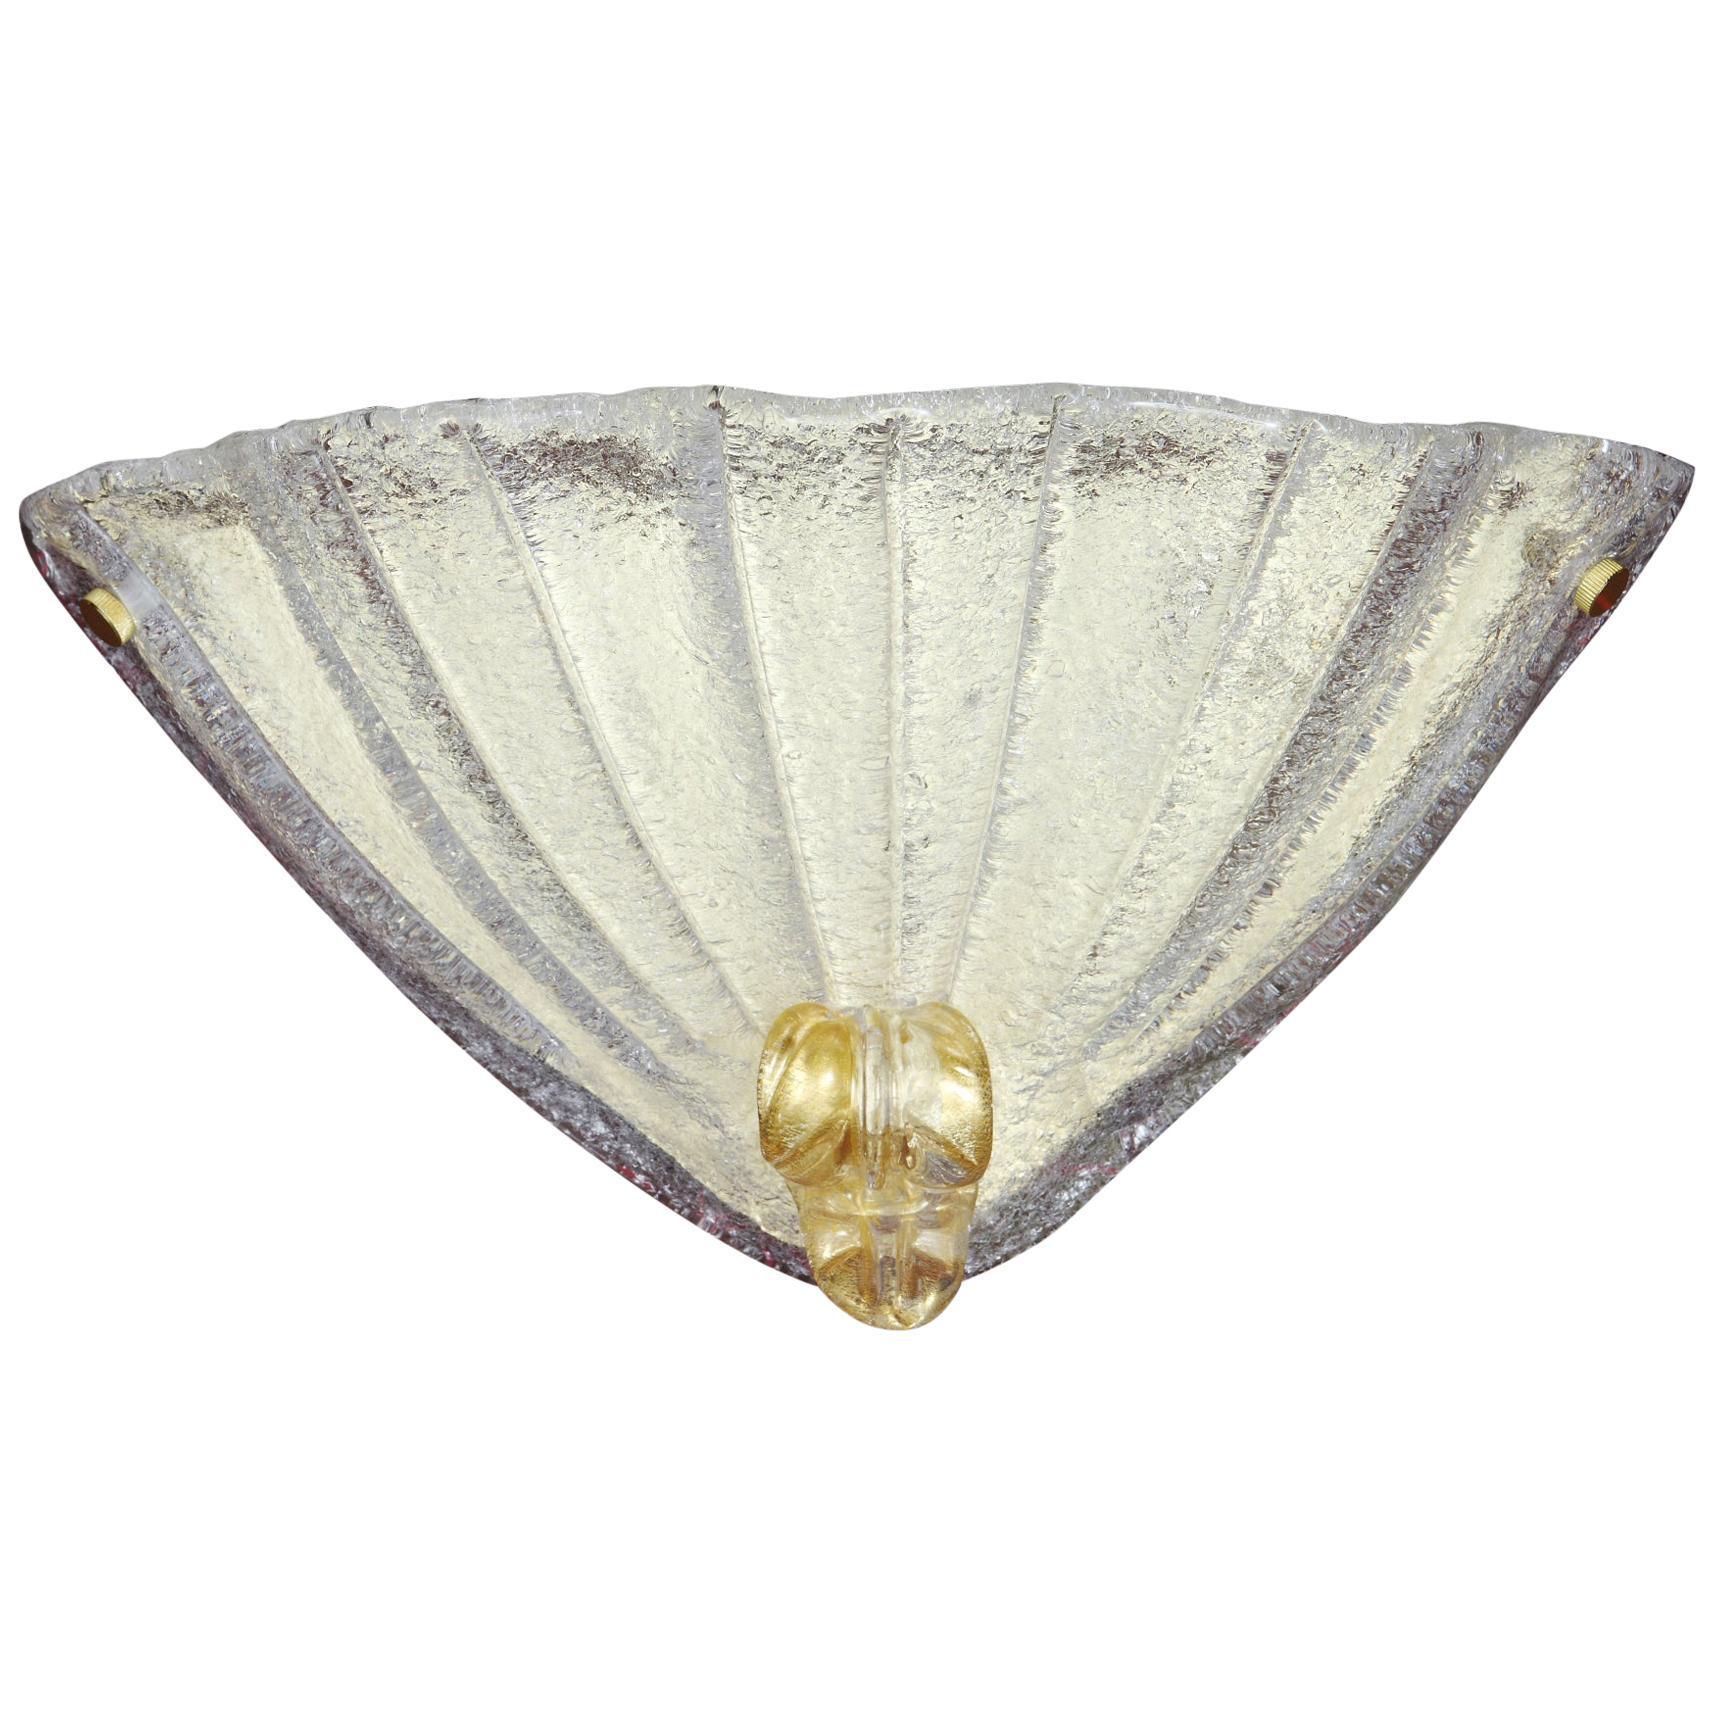 Italian wall light with a Murano glass shield hand blown in Graniglia technique to produce granular textured effect with gold flecks, mounted on gold-plated finish frame / Made in Italy
Measures: Height 9 inches, width 16 inches, depth 6 inches
1